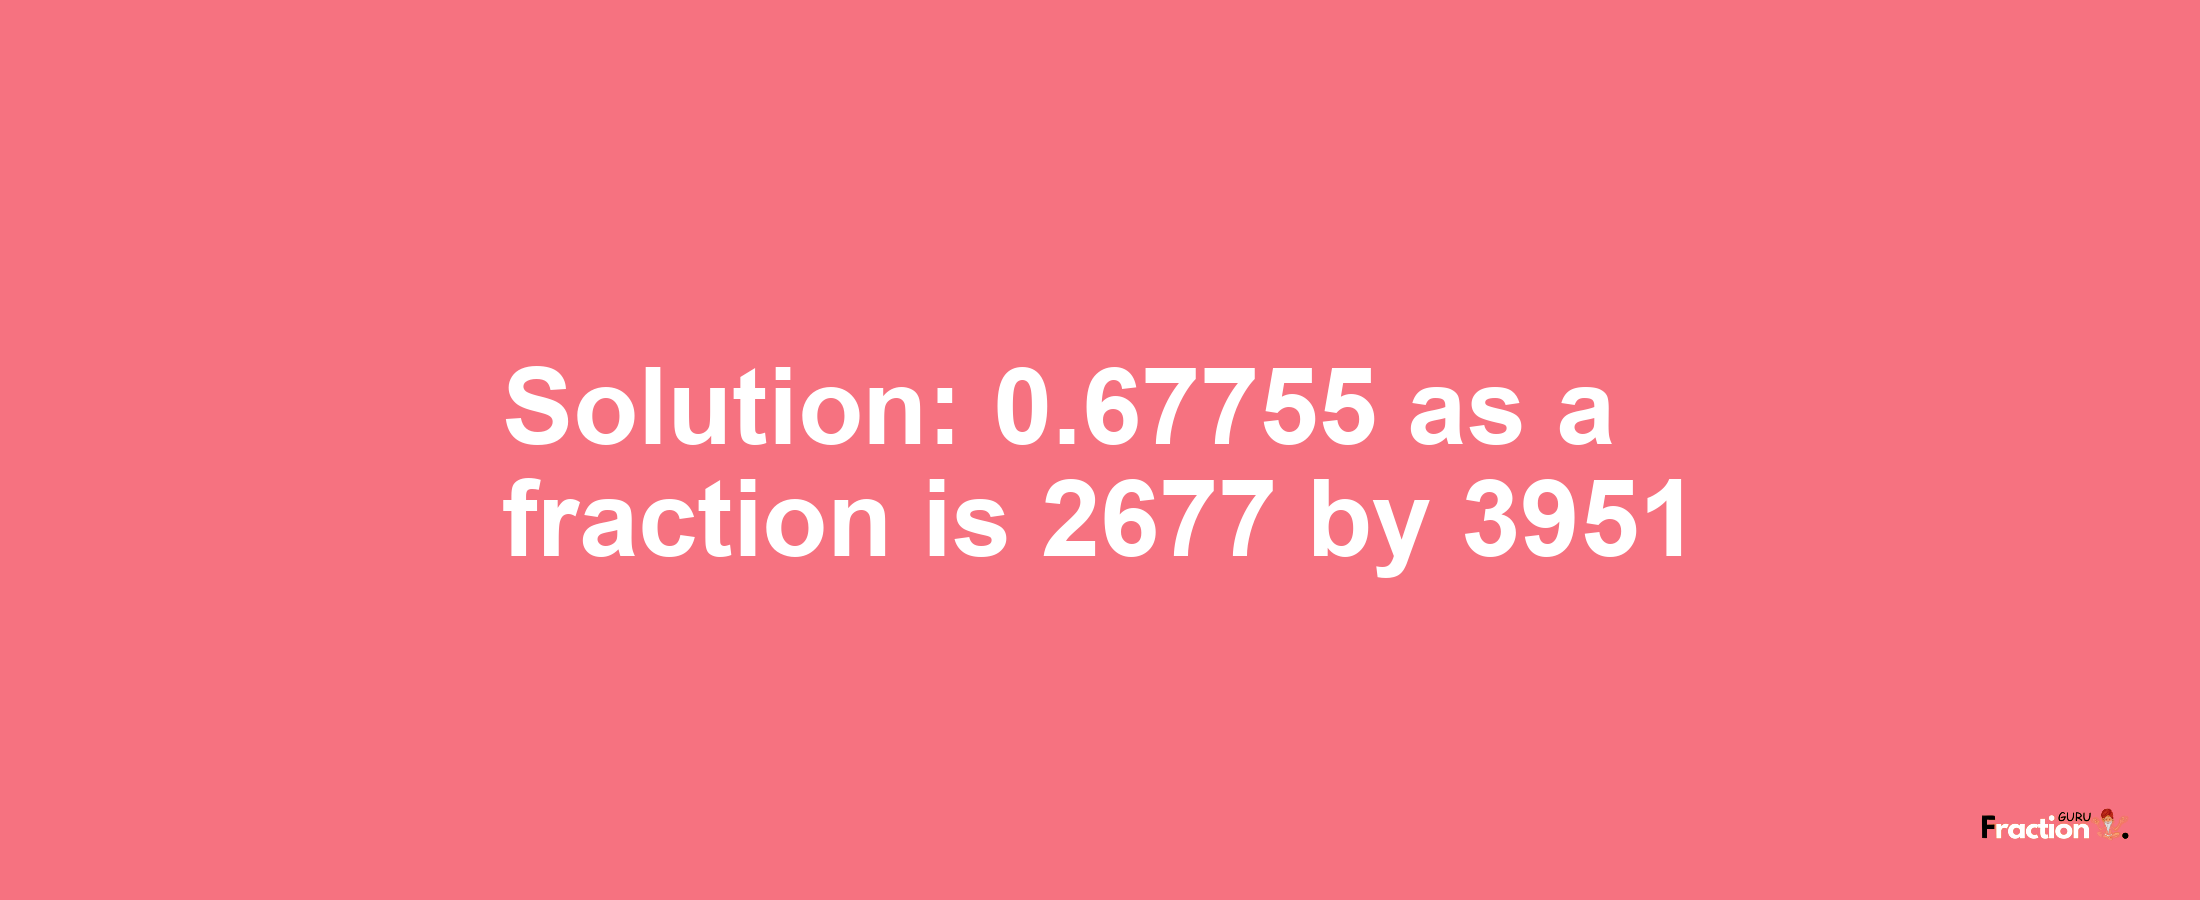 Solution:0.67755 as a fraction is 2677/3951